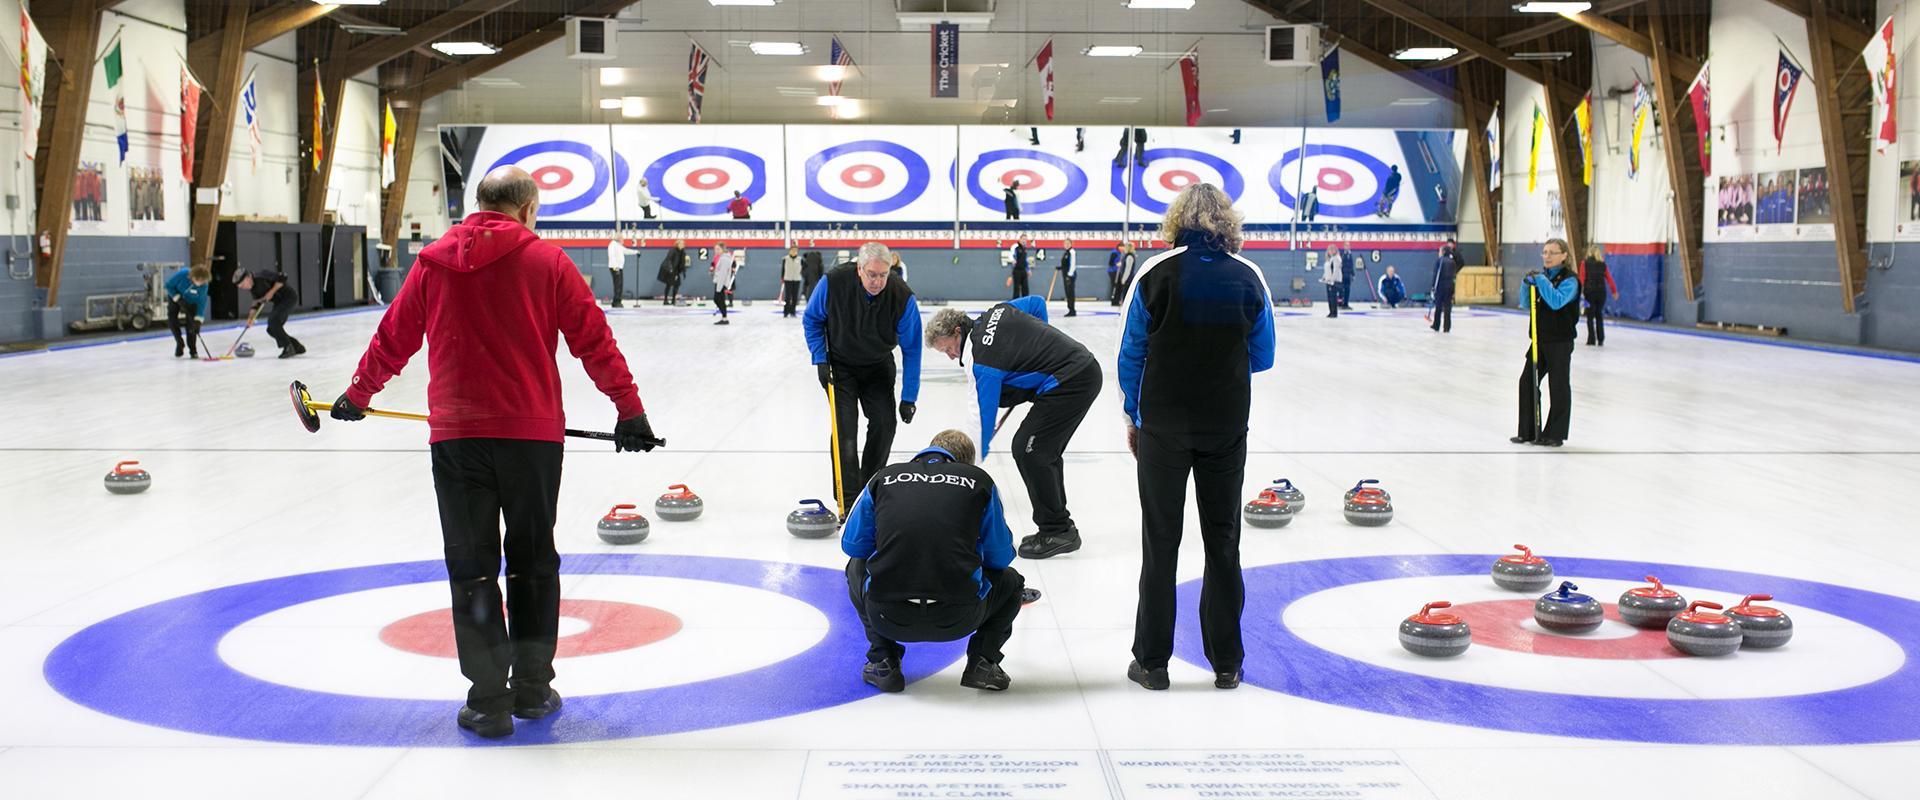 Members Curling at the Cricket Club Curling Rink